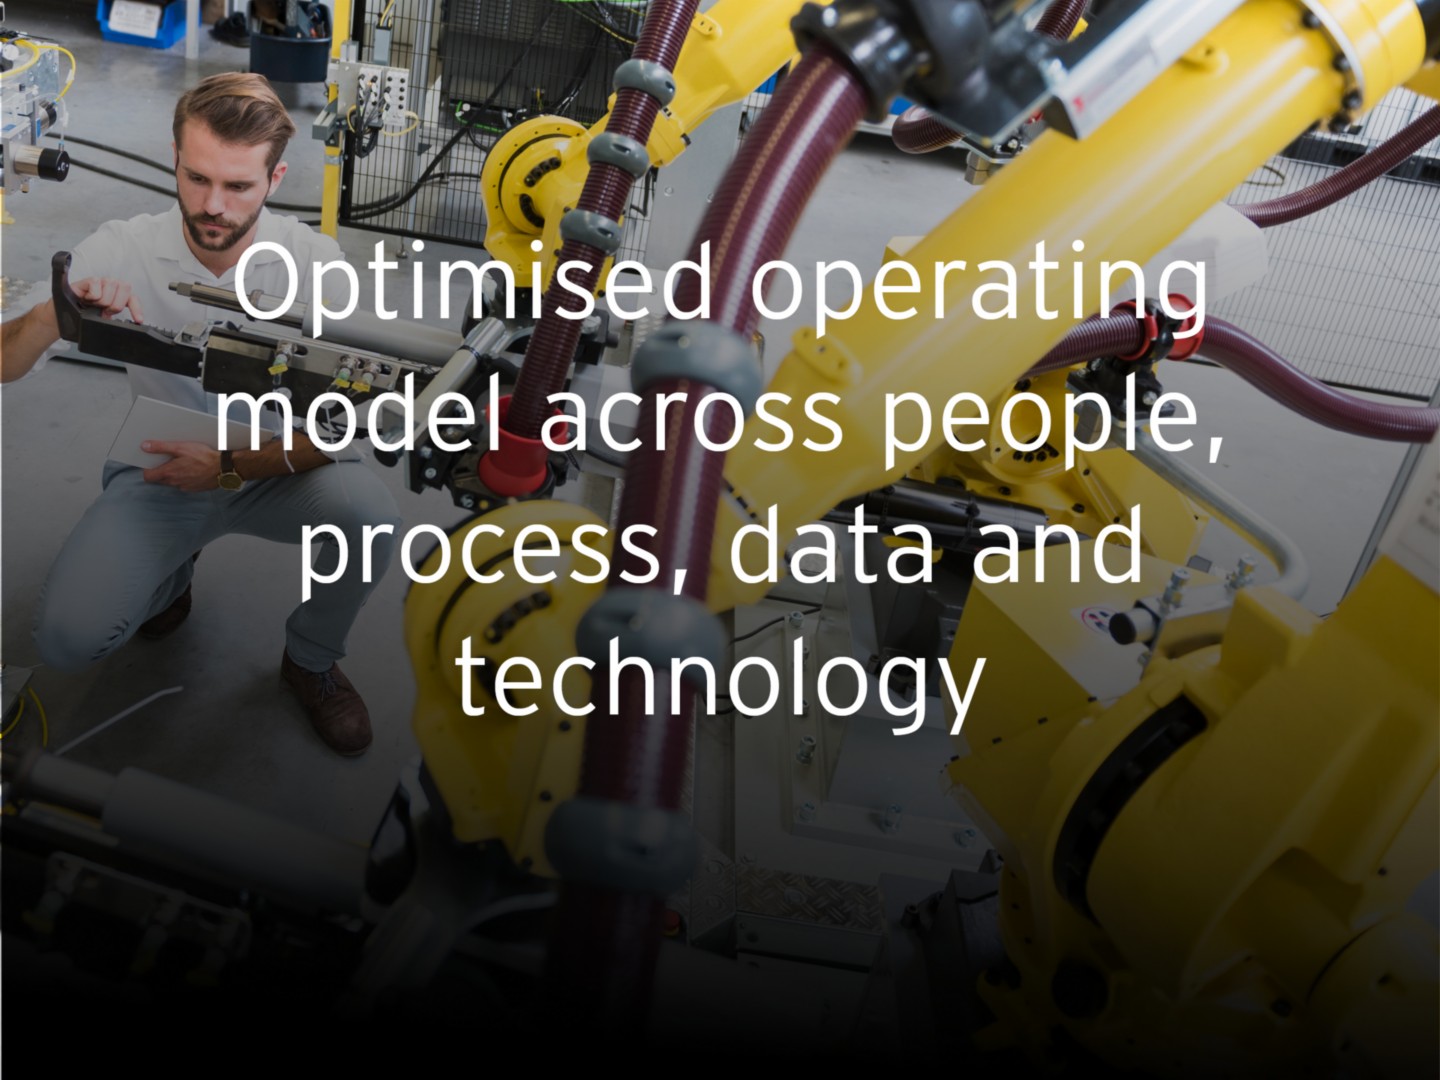 Optimised operating model across people, process, data and technology